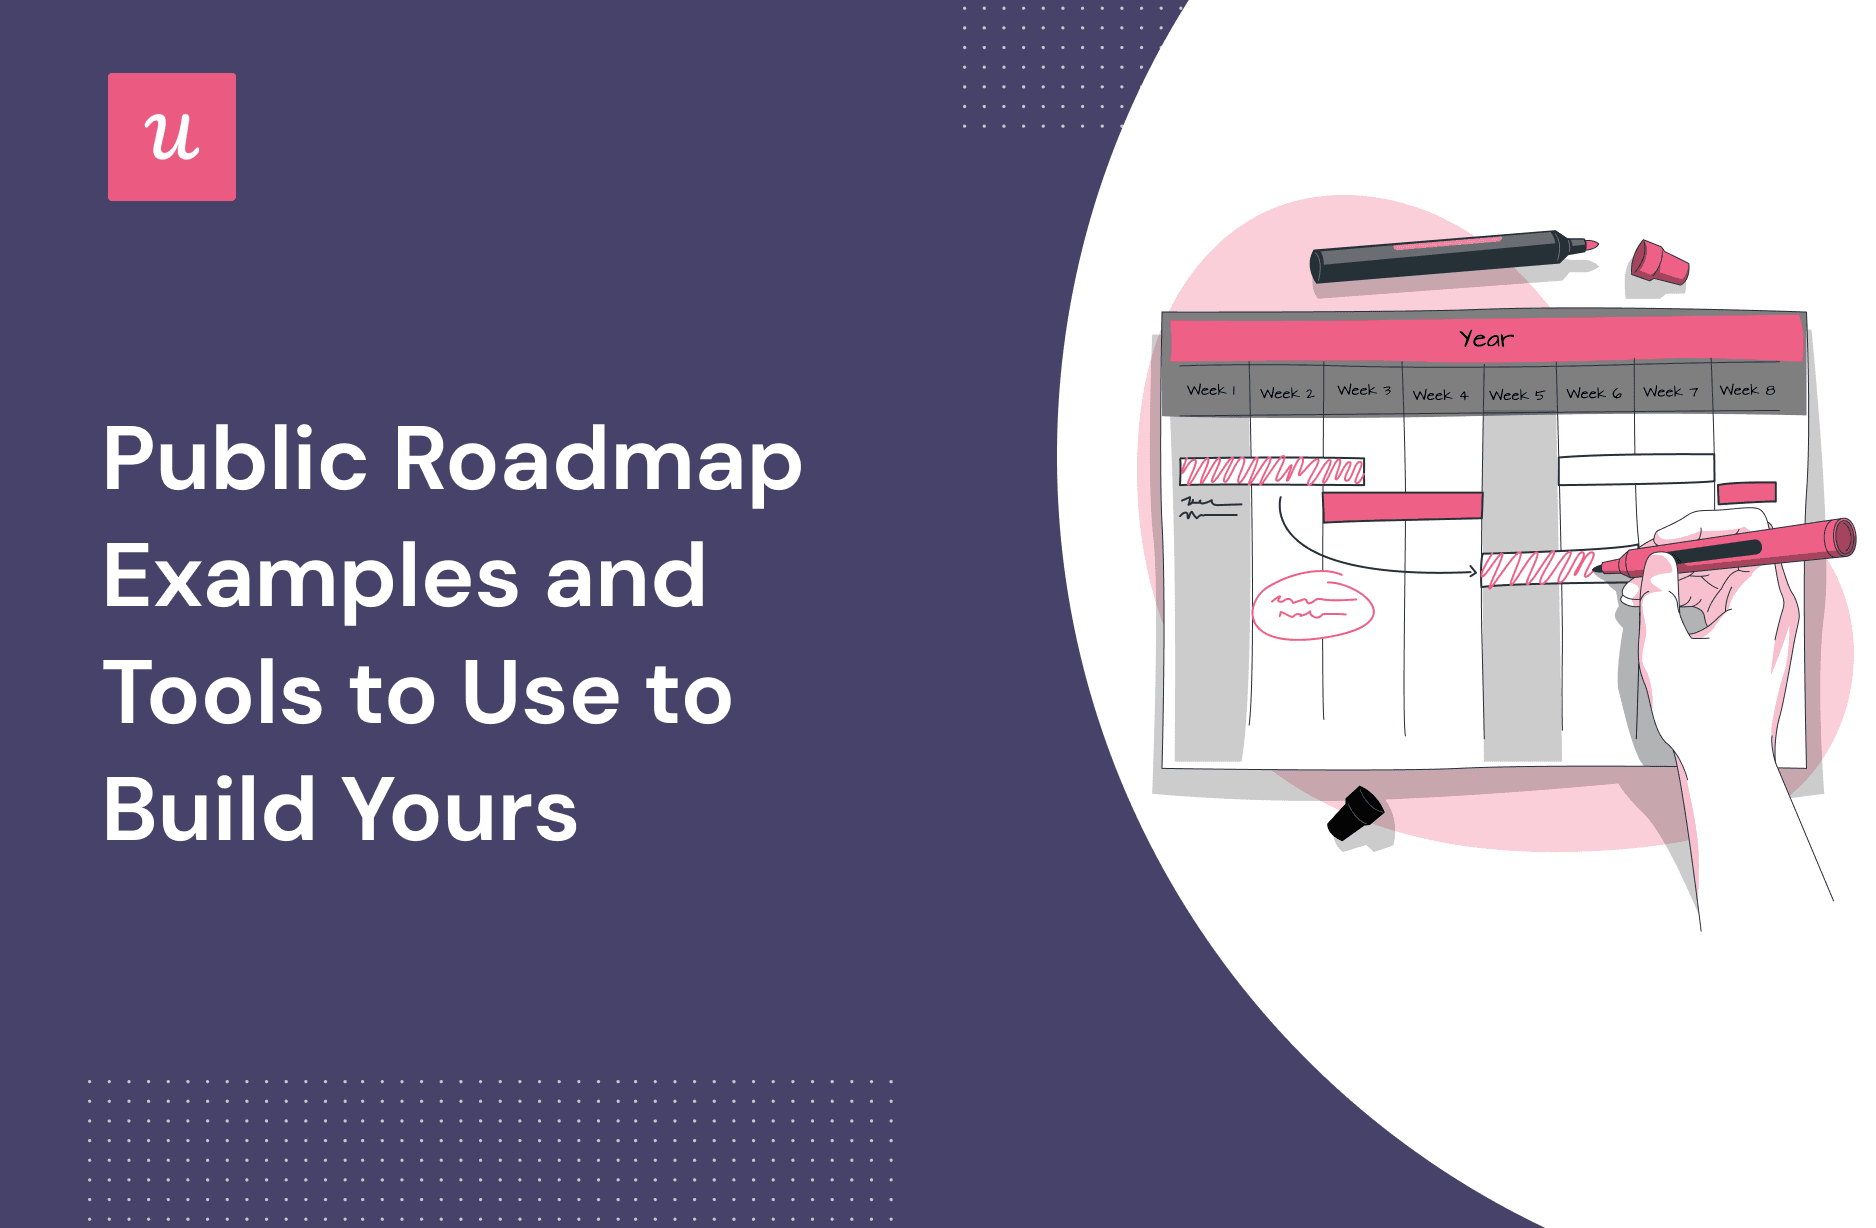 Public Roadmap Examples and Tools to Use to Build Yours